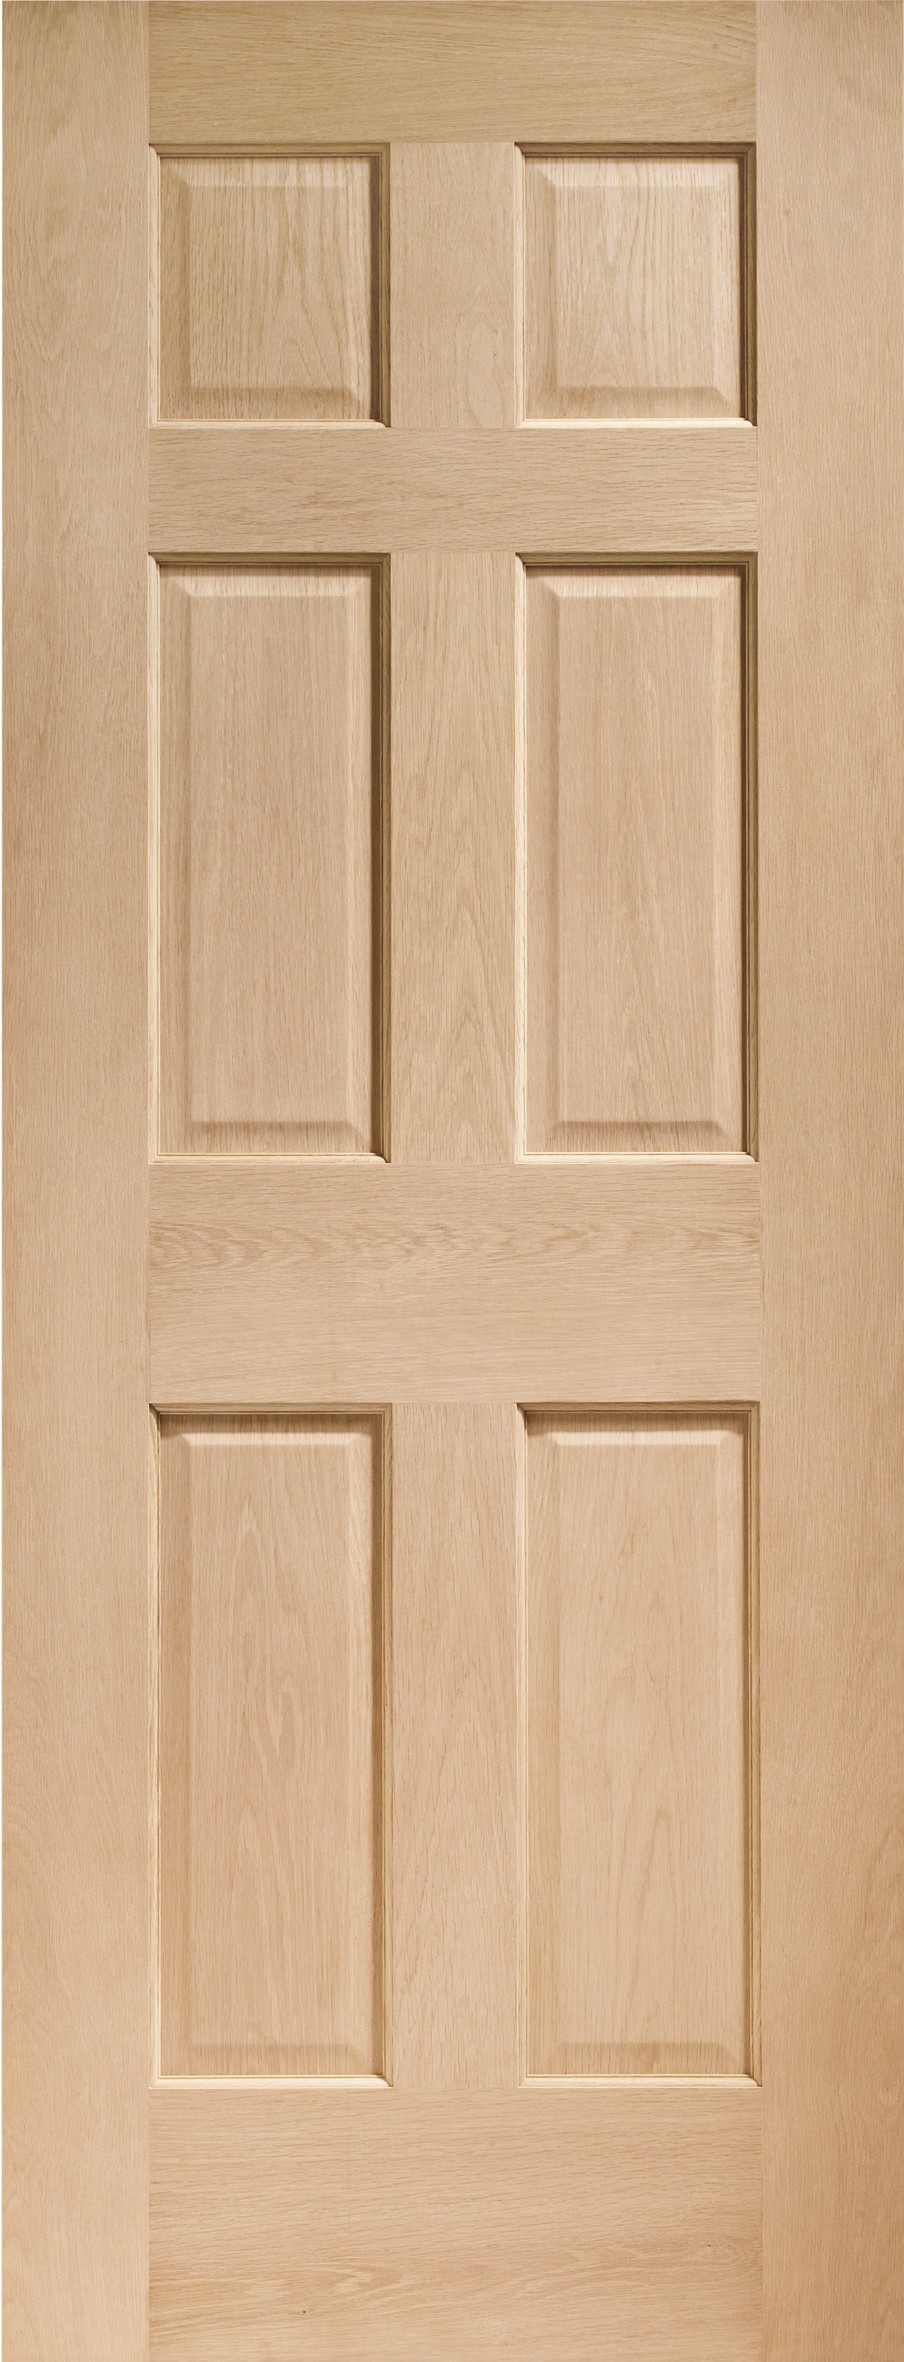 XL JOINERY DOORS -  INTOCOL30  Internal Oak Colonial 6 Panel  INTOCOL30